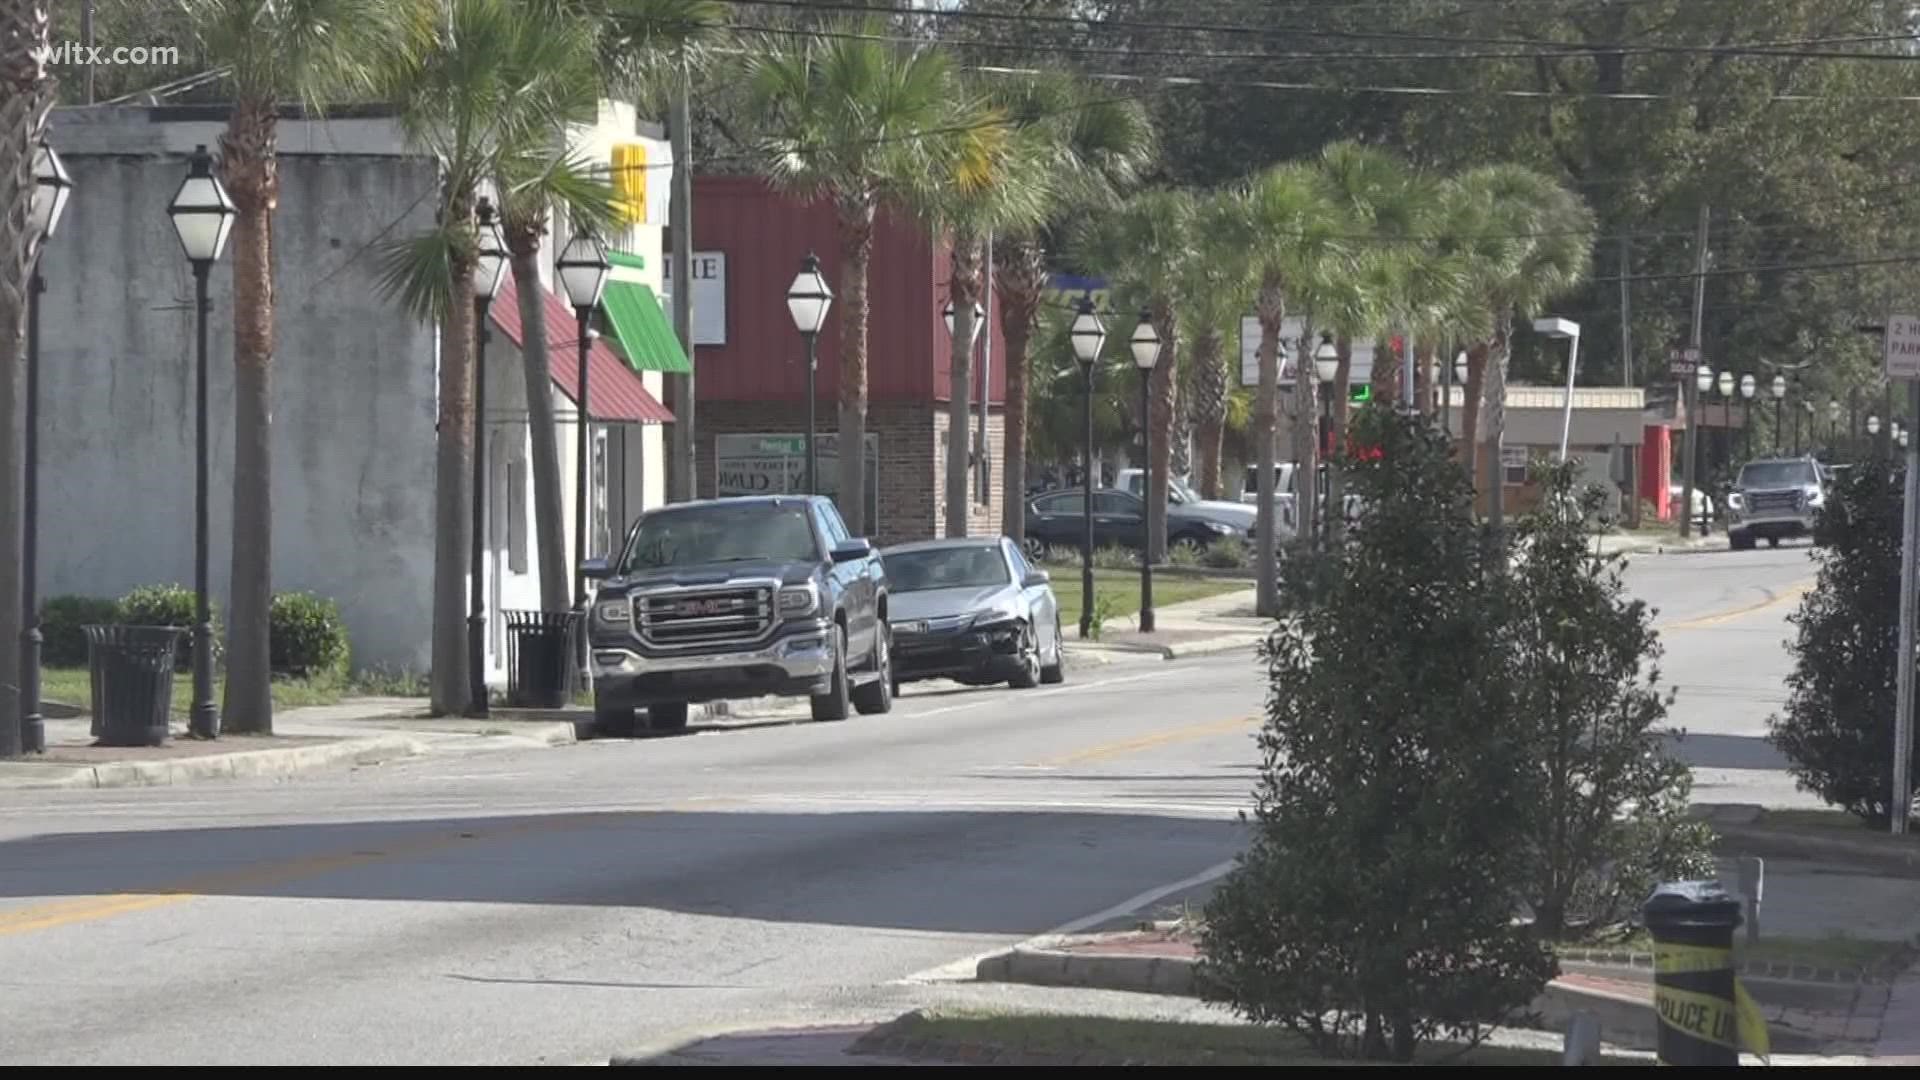 The plan would allow Holly Hill to run sewage pipes from Eutawville along Eutaw road into the town of Holly Hill.